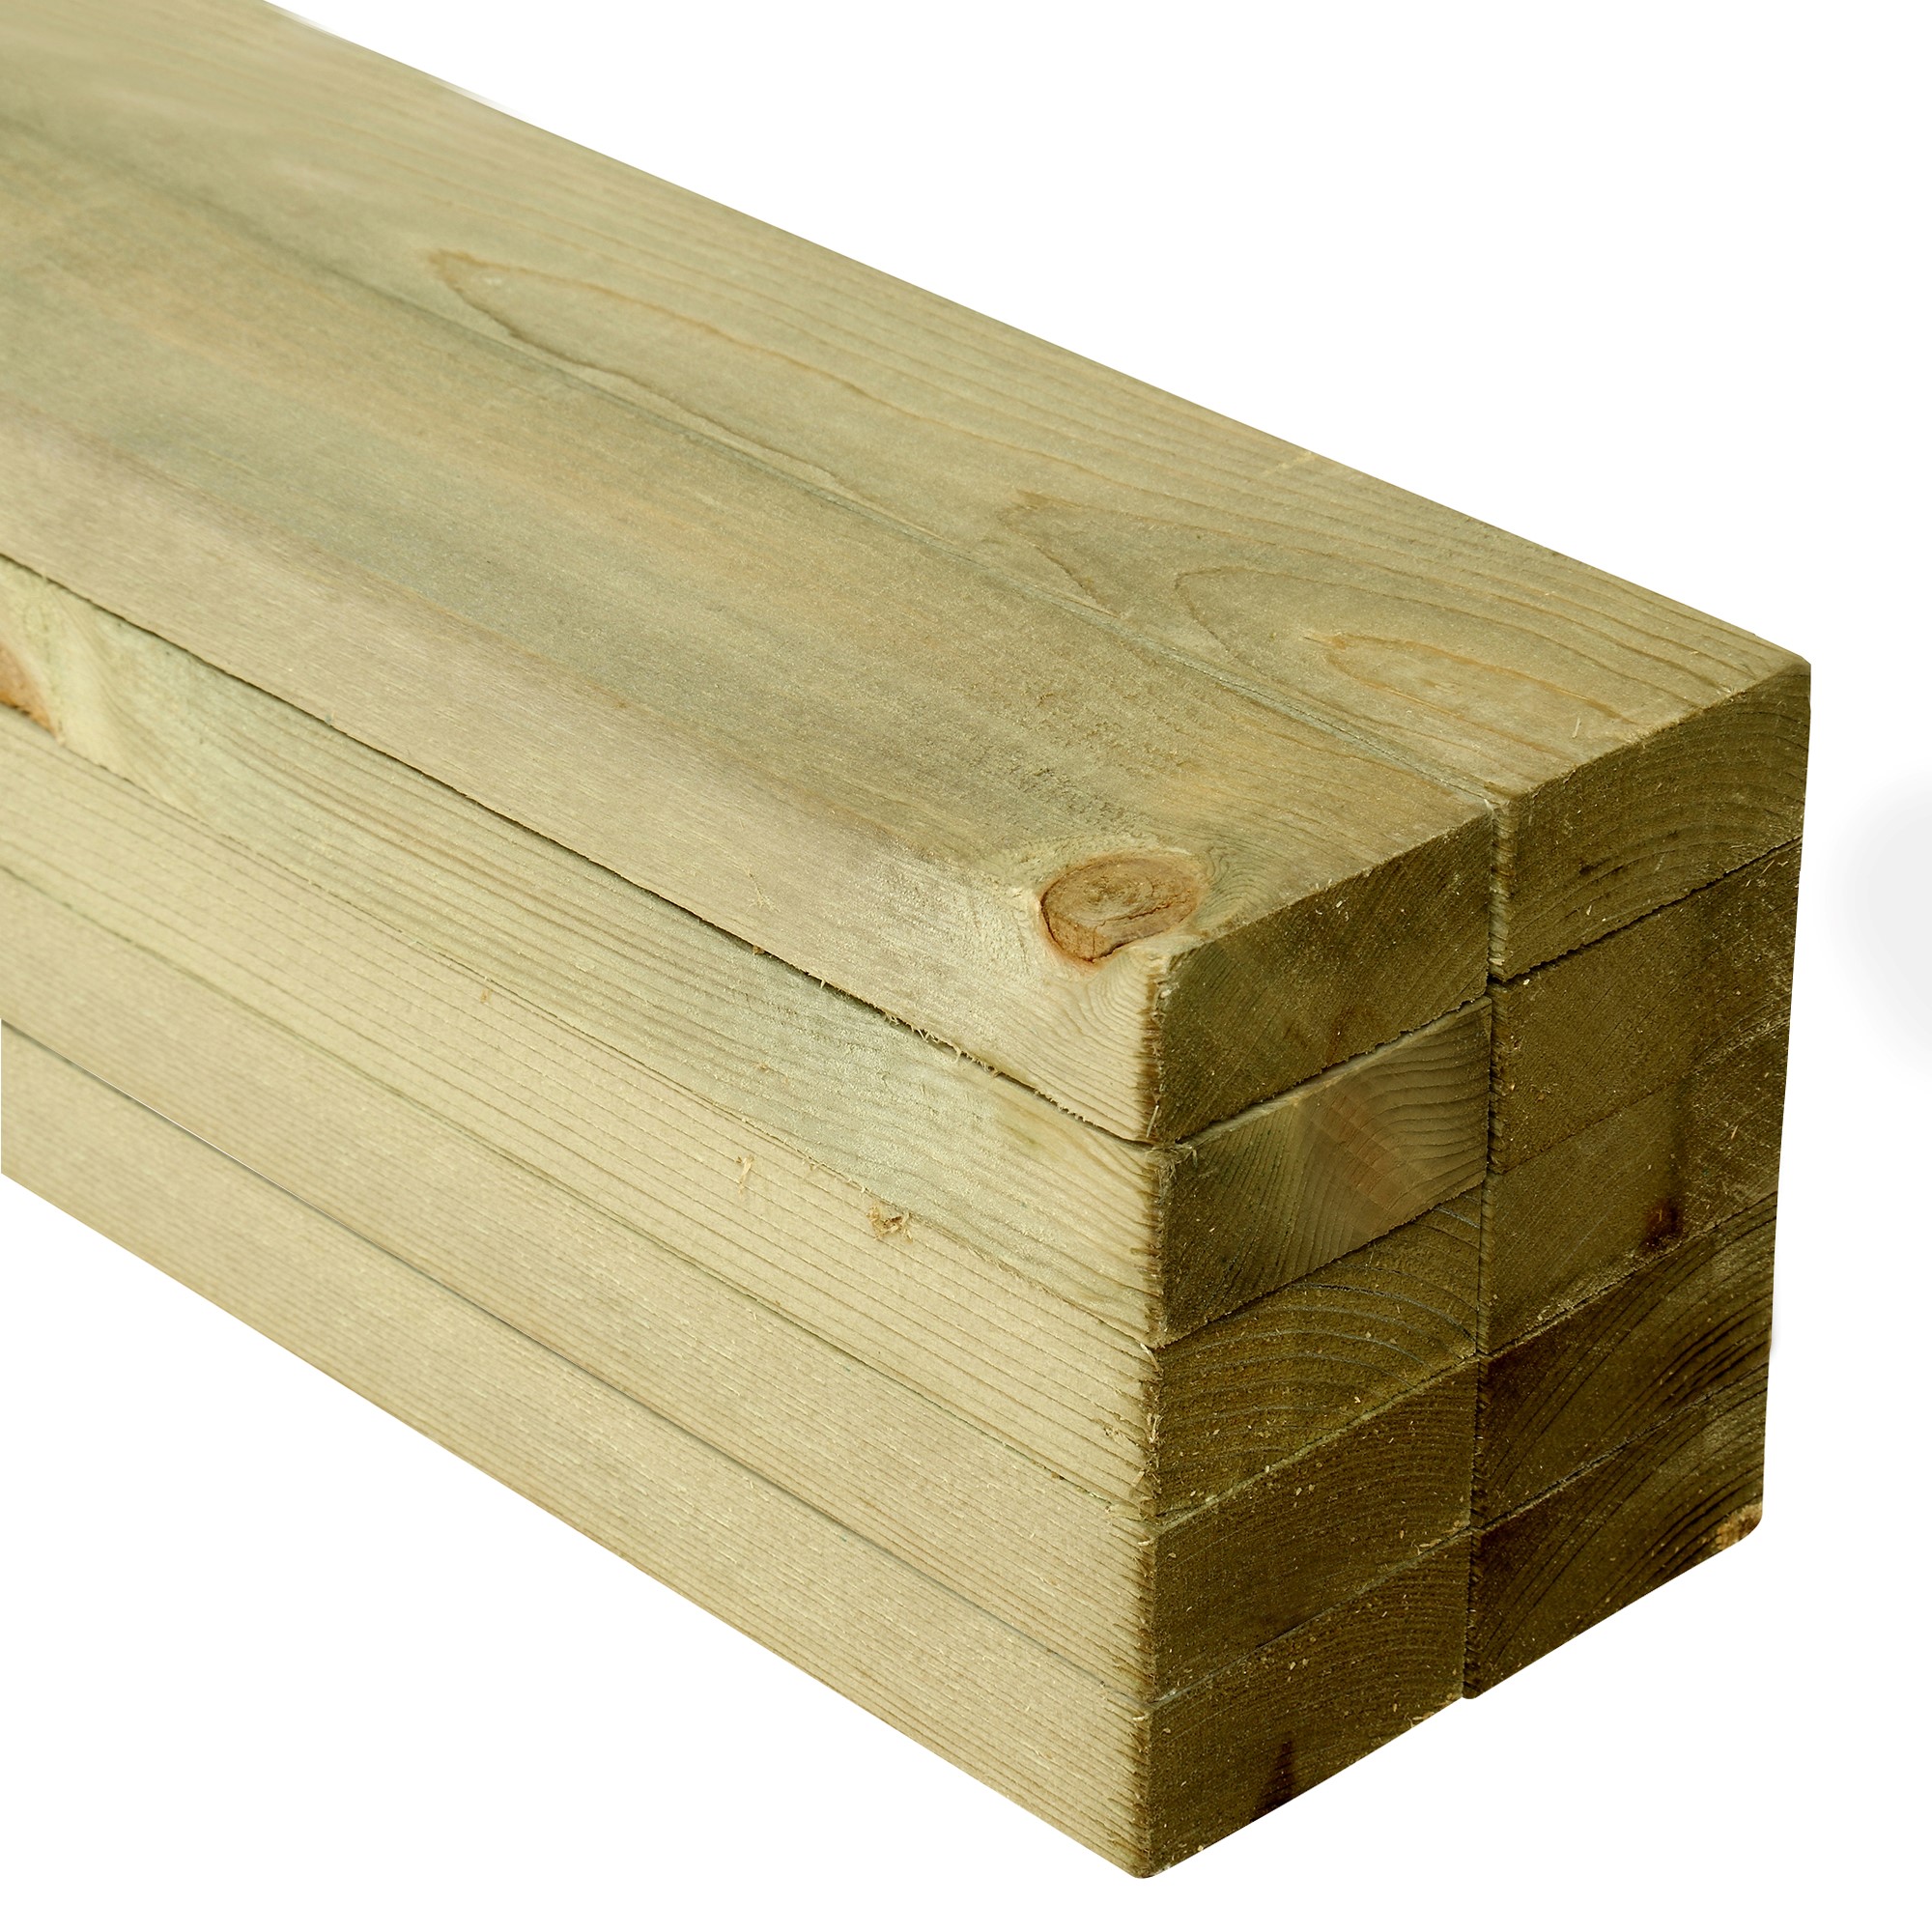 Image of Wickes Treated Sawn Timber - 22 x 47 x 1800mm - Pack of 10